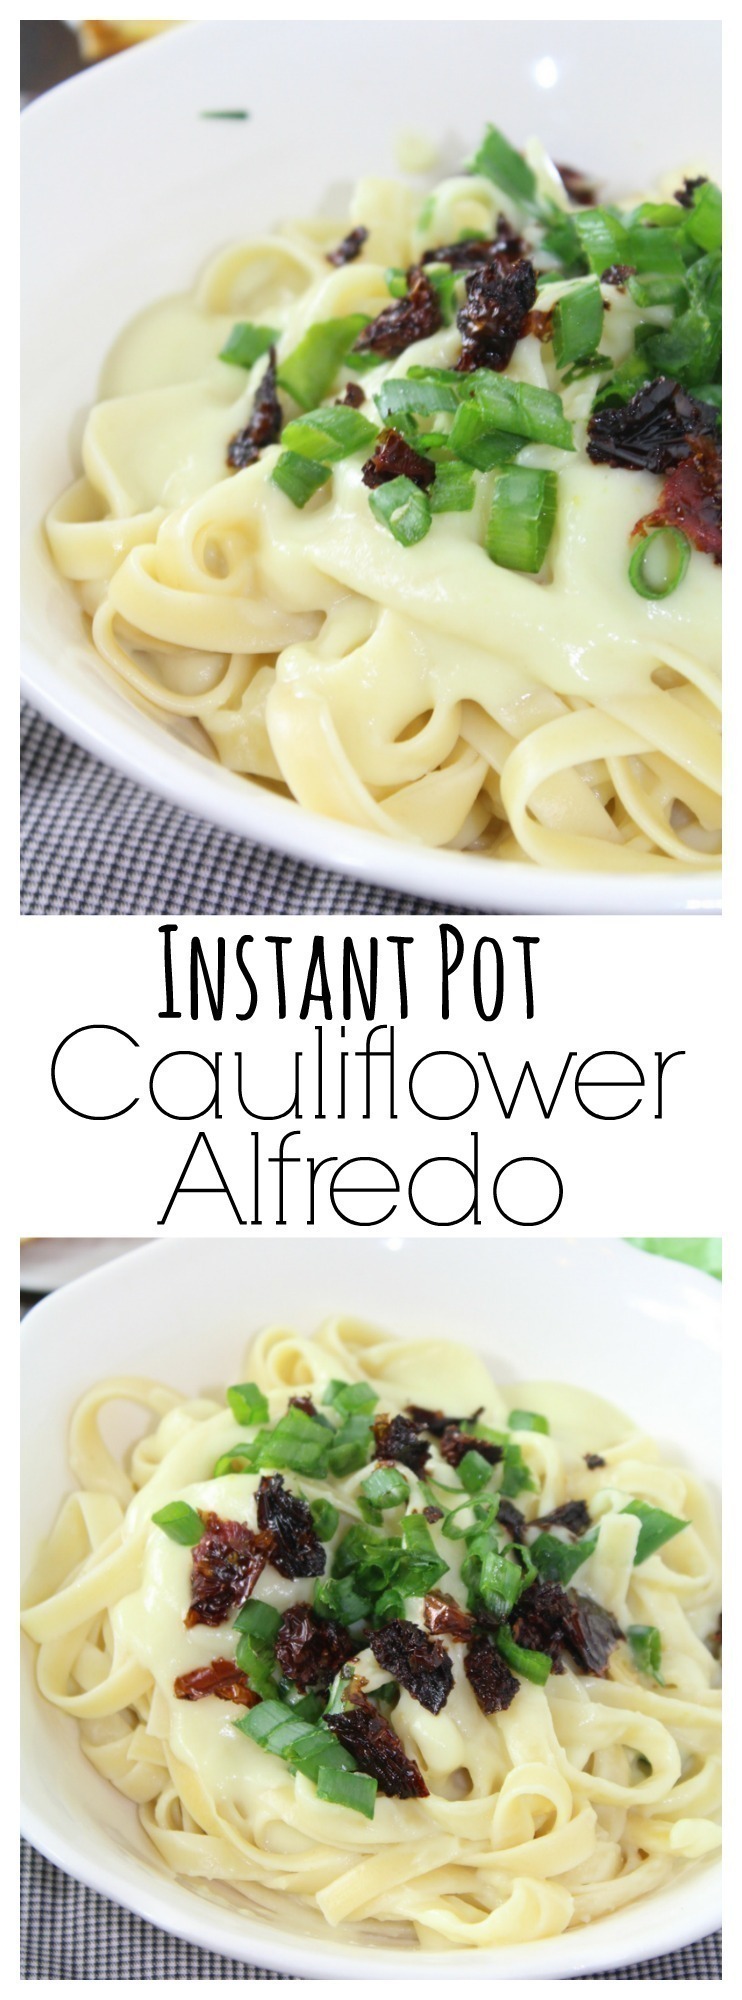 A head of cauliflower is transformed into a flavorful, creamy alfredo sauce that's low in fat and beautiful on pasta.